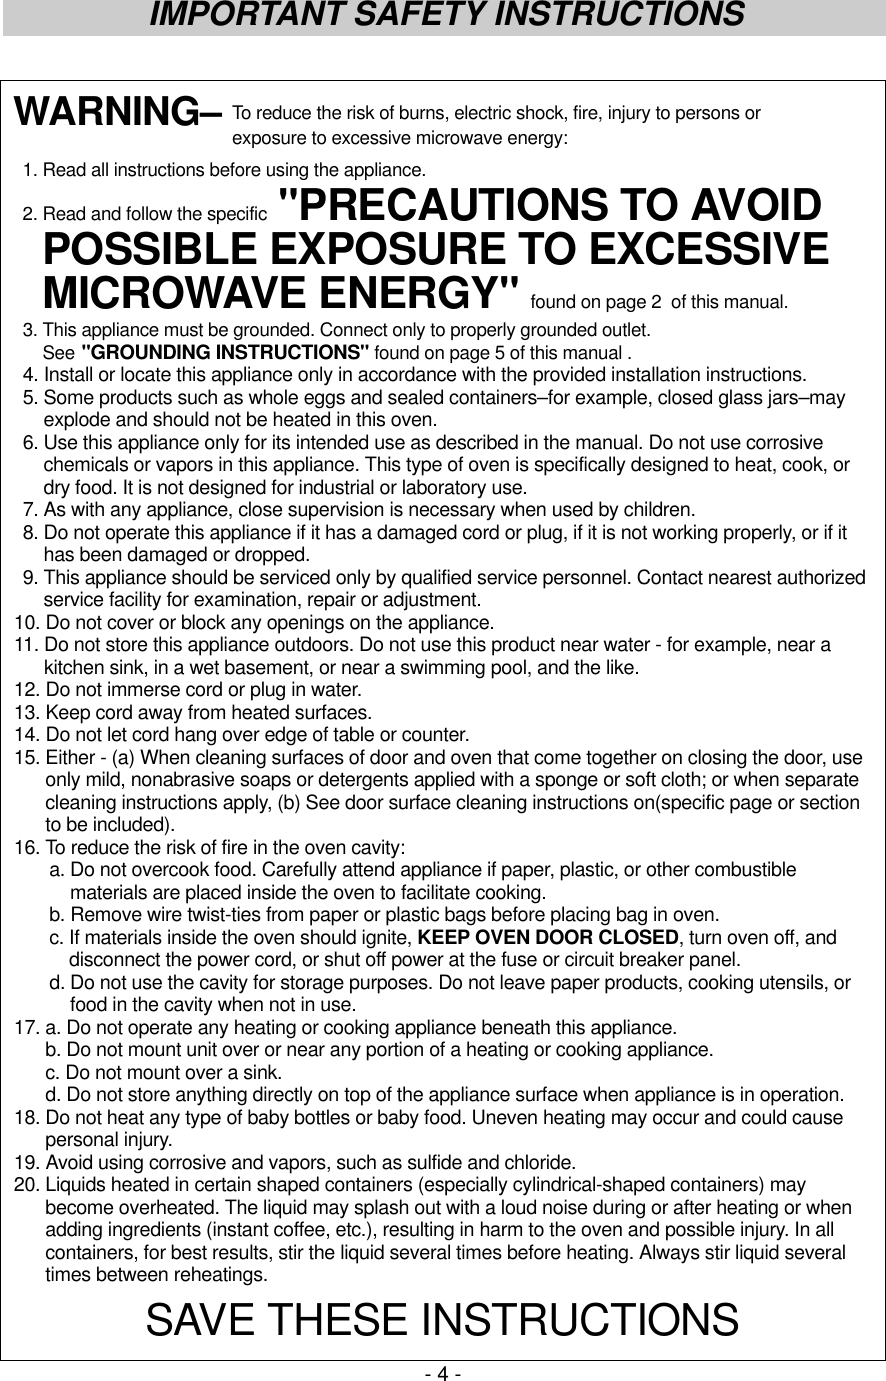 - 4 -IMPORTANT SAFETY INSTRUCTIONSWARNING– To reduce the risk of burns, electric shock, fire, injury to persons or exposure to excessive microwave energy:1. Read all instructions before using the appliance.2. Read and follow the specific &quot;PRECAUTIONS TO AVOIDPOSSIBLE EXPOSURE TO EXCESSIVEMICROWAVE ENERGY&quot; found on page 2  of this manual.3. This appliance must be grounded. Connect only to properly grounded outlet.See &quot;GROUNDING INSTRUCTIONS&quot; found on page 5 of this manual .4. Install or locate this appliance only in accordance with the provided installation instructions.5. Some products such as whole eggs and sealed containers–for example, closed glass jars–mayexplode and should not be heated in this oven.6. Use this appliance only for its intended use as described in the manual. Do not use corrosivechemicals or vapors in this appliance. This type of oven is specifically designed to heat, cook, ordry food. It is not designed for industrial or laboratory use.7. As with any appliance, close supervision is necessary when used by children.8. Do not operate this appliance if it has a damaged cord or plug, if it is not working properly, or if ithas been damaged or dropped.9. This appliance should be serviced only by qualified service personnel. Contact nearest authorizedservice facility for examination, repair or adjustment.10. Do not cover or block any openings on the appliance.11. Do not store this appliance outdoors. Do not use this product near water - for example, near akitchen sink, in a wet basement, or near a swimming pool, and the like.12. Do not immerse cord or plug in water.13. Keep cord away from heated surfaces.14. Do not let cord hang over edge of table or counter.15. Either - (a) When cleaning surfaces of door and oven that come together on closing the door, useonly mild, nonabrasive soaps or detergents applied with a sponge or soft cloth; or when separatecleaning instructions apply, (b) See door surface cleaning instructions on(specific page or sectionto be included).16. To reduce the risk of fire in the oven cavity:a. Do not overcook food. Carefully attend appliance if paper, plastic, or other combustiblematerials are placed inside the oven to facilitate cooking.b. Remove wire twist-ties from paper or plastic bags before placing bag in oven.c. If materials inside the oven should ignite, KEEP OVEN DOOR CLOSED, turn oven off, anddisconnect the power cord, or shut off power at the fuse or circuit breaker panel.d. Do not use the cavity for storage purposes. Do not leave paper products, cooking utensils, orfood in the cavity when not in use.17. a. Do not operate any heating or cooking appliance beneath this appliance.b. Do not mount unit over or near any portion of a heating or cooking appliance.c. Do not mount over a sink.d. Do not store anything directly on top of the appliance surface when appliance is in operation.18. Do not heat any type of baby bottles or baby food. Uneven heating may occur and could causepersonal injury.19. Avoid using corrosive and vapors, such as sulfide and chloride.20. Liquids heated in certain shaped containers (especially cylindrical-shaped containers) maybecome overheated. The liquid may splash out with a loud noise during or after heating or whenadding ingredients (instant coffee, etc.), resulting in harm to the oven and possible injury. In allcontainers, for best results, stir the liquid several times before heating. Always stir liquid severaltimes between reheatings.SAVE THESE INSTRUCTIONS